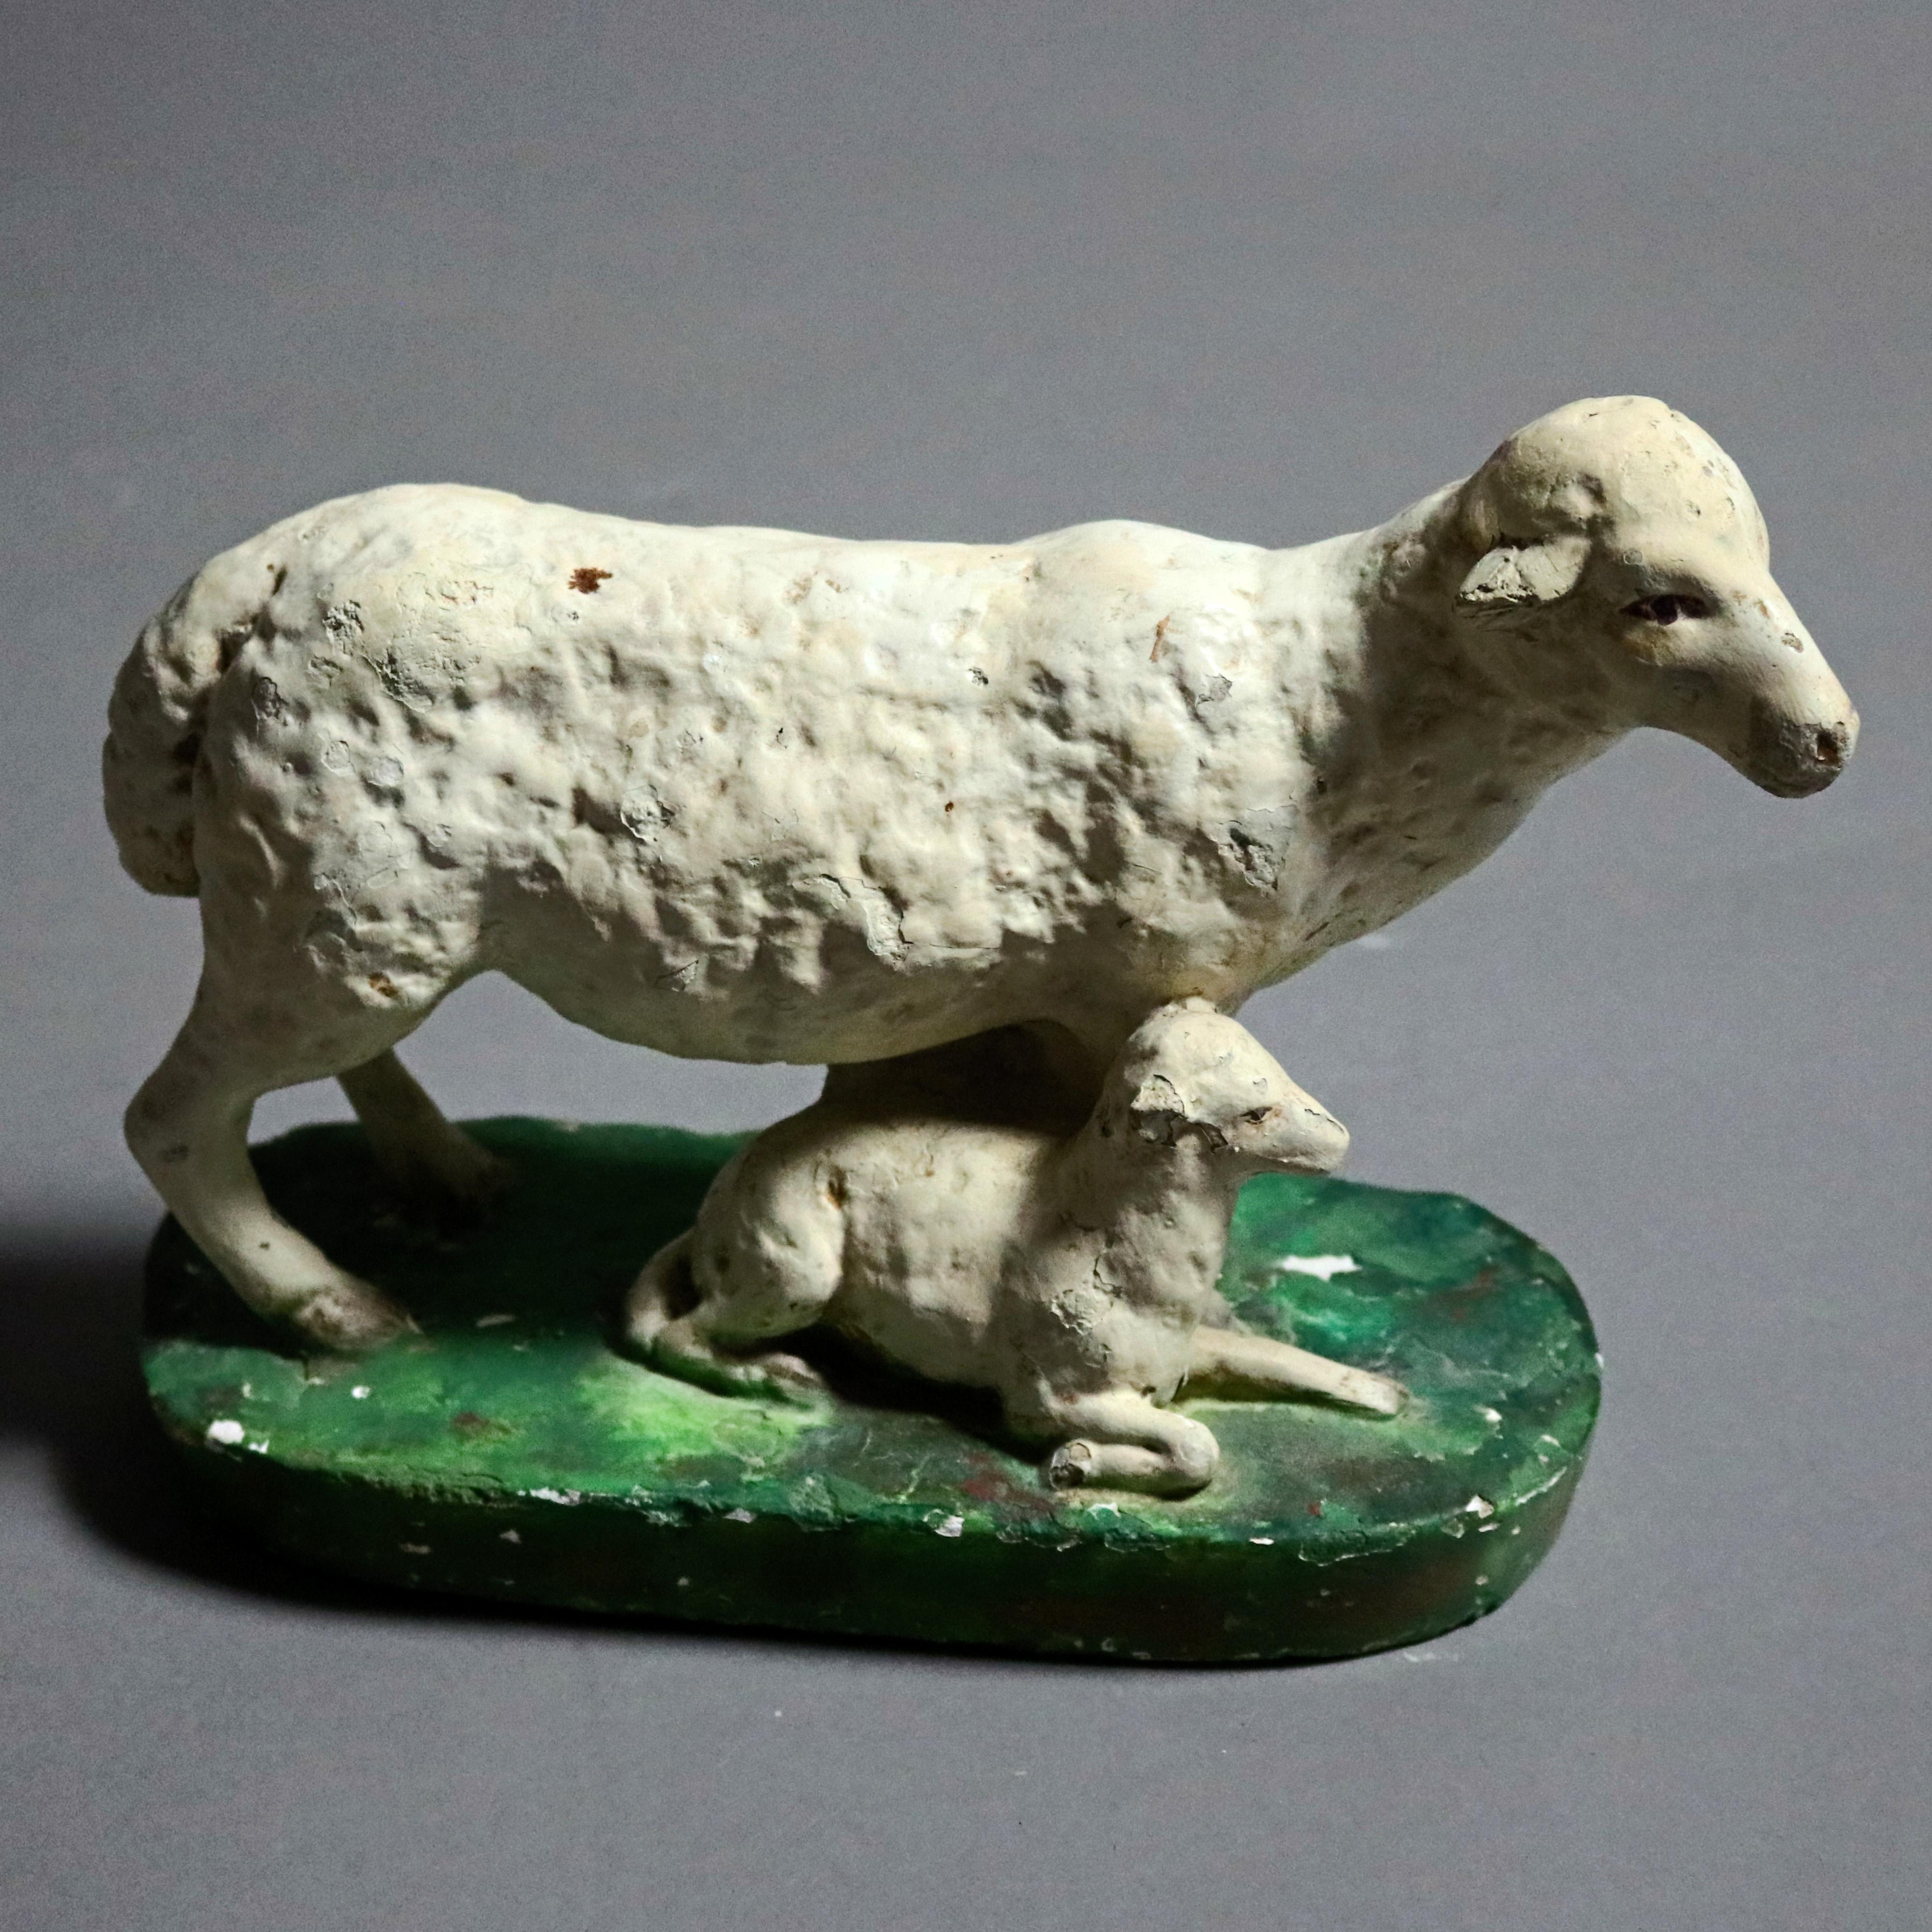 Three antique figural chalkware sheep are hand painted and depicted in pasture setting, circa 1820

***DELIVERY NOTICE – Due to COVID-19 we are employing NO-CONTACT PRACTICES in the transfer of purchased items.  Additionally, for those who prefer to